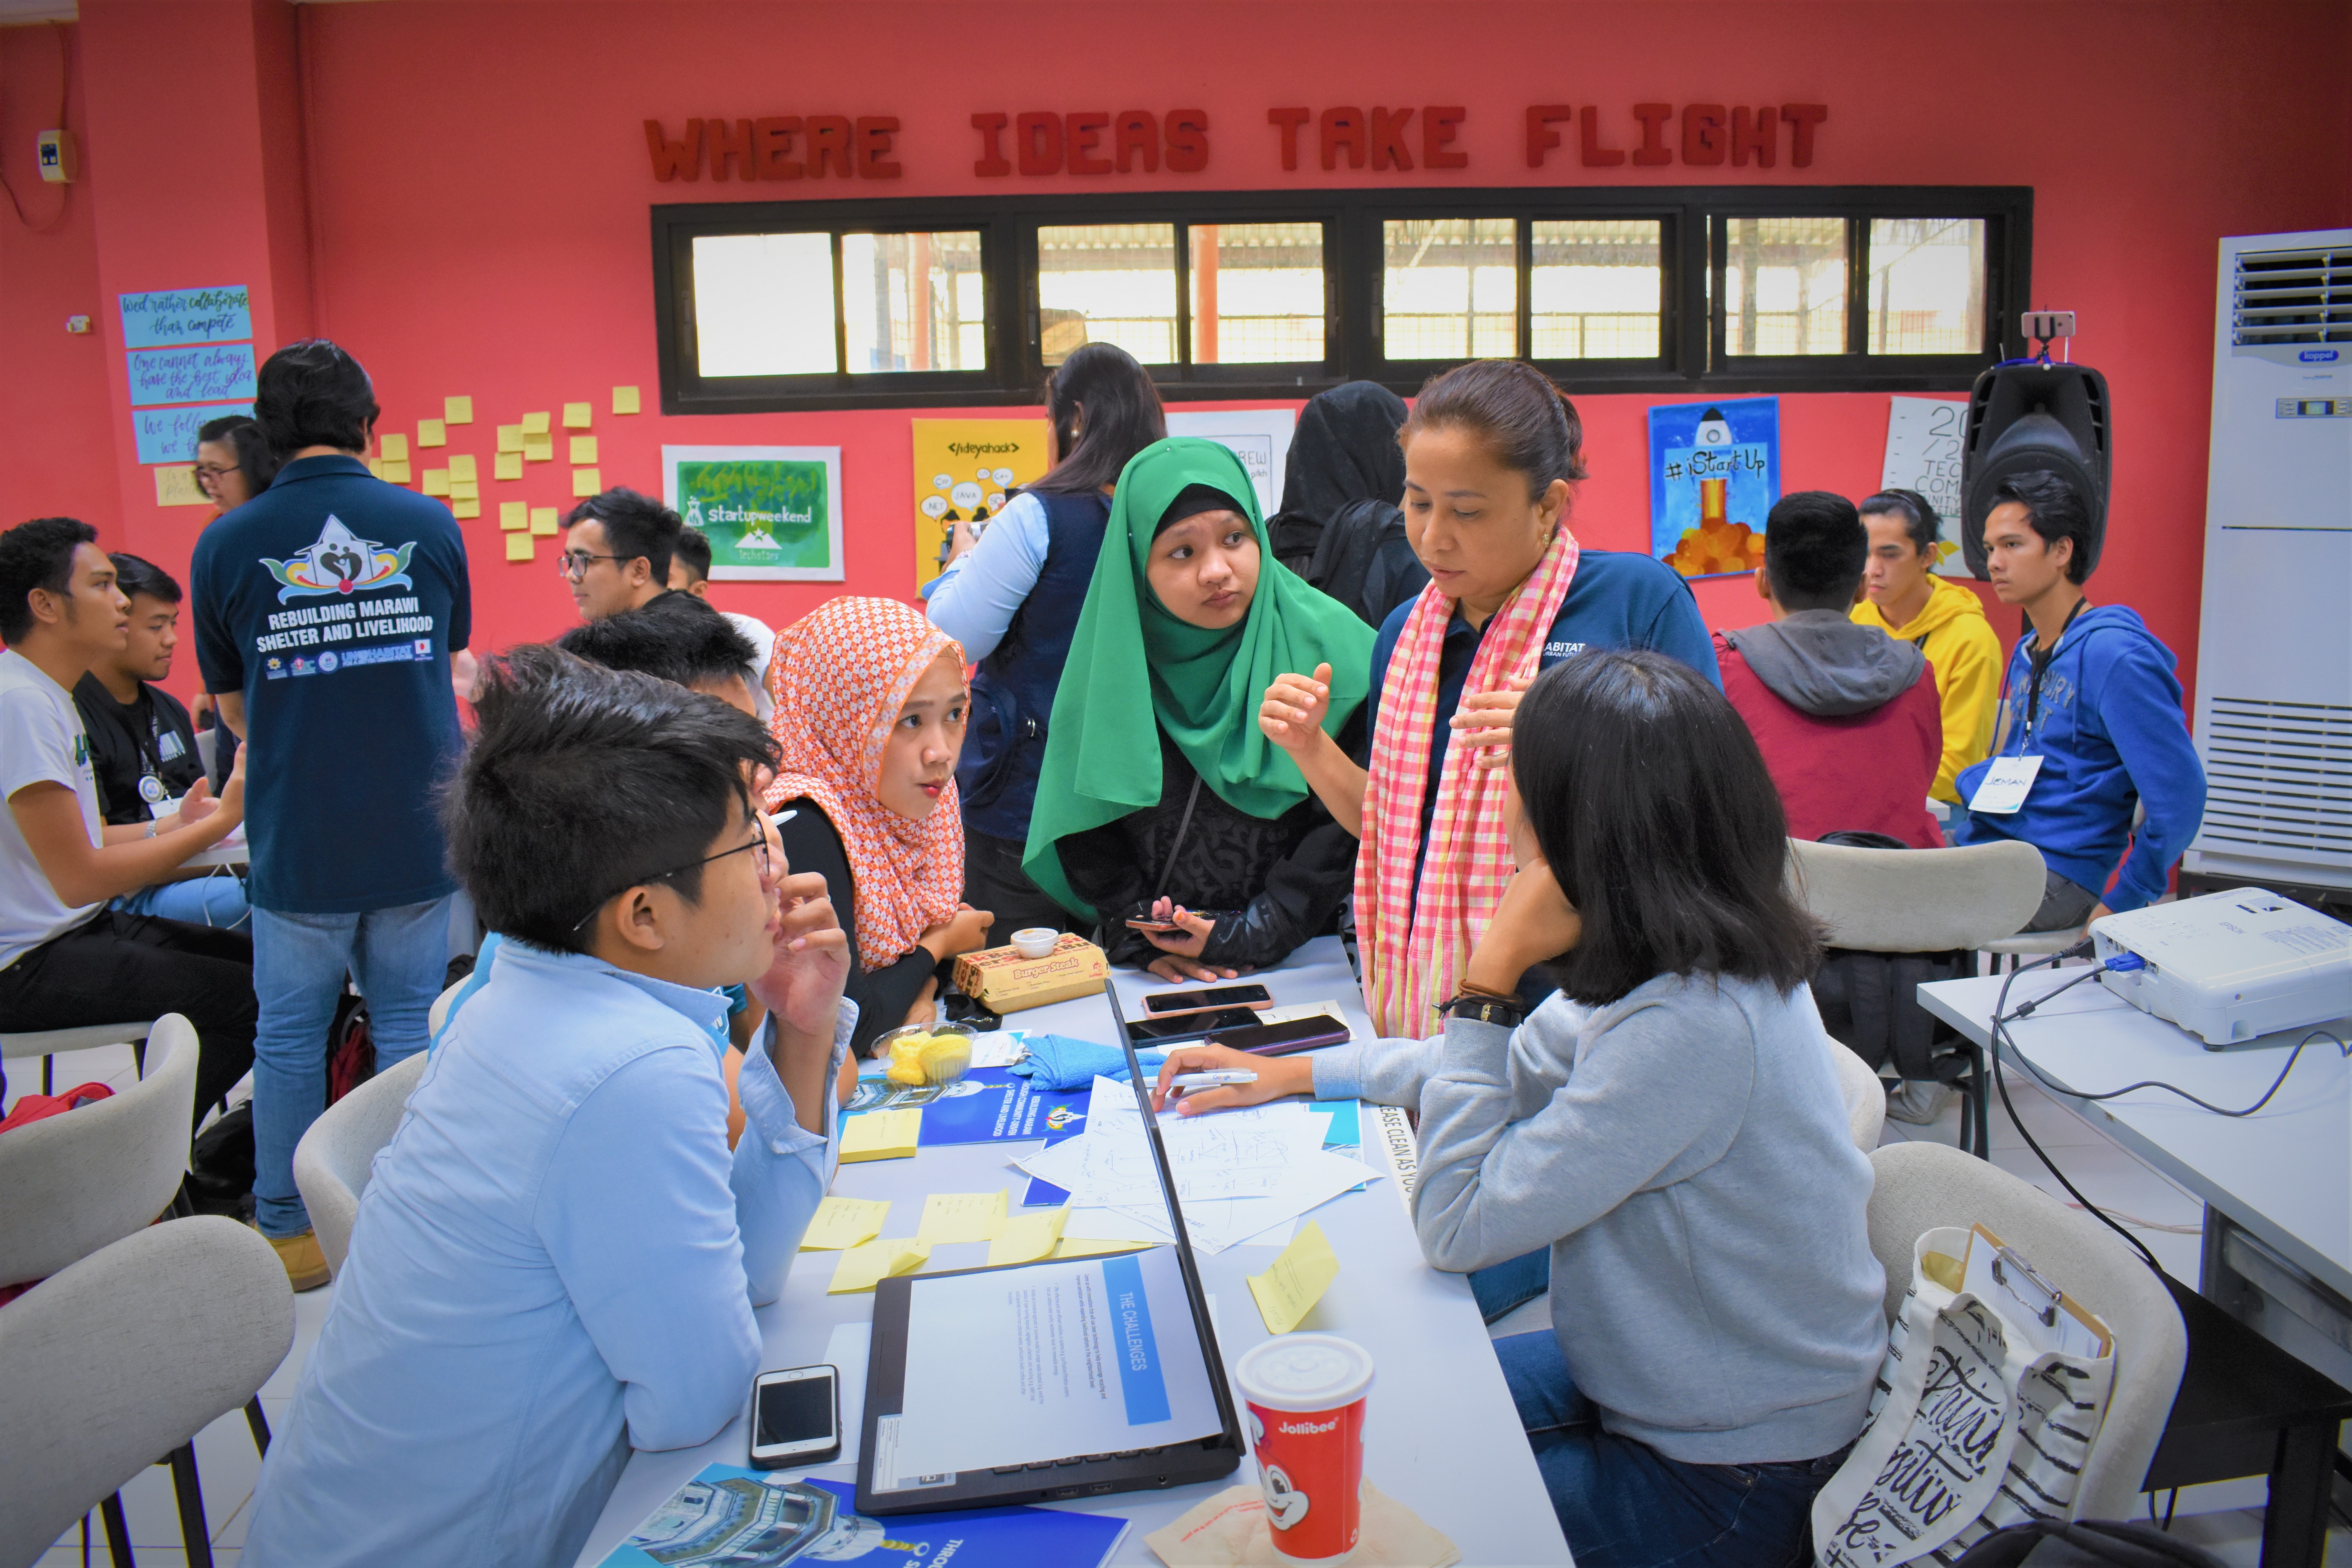 University students, teachers, humanitarian workers, government officials, and communities gather in the first clean technology hackathon to address humanitarian issues in Marawi City.